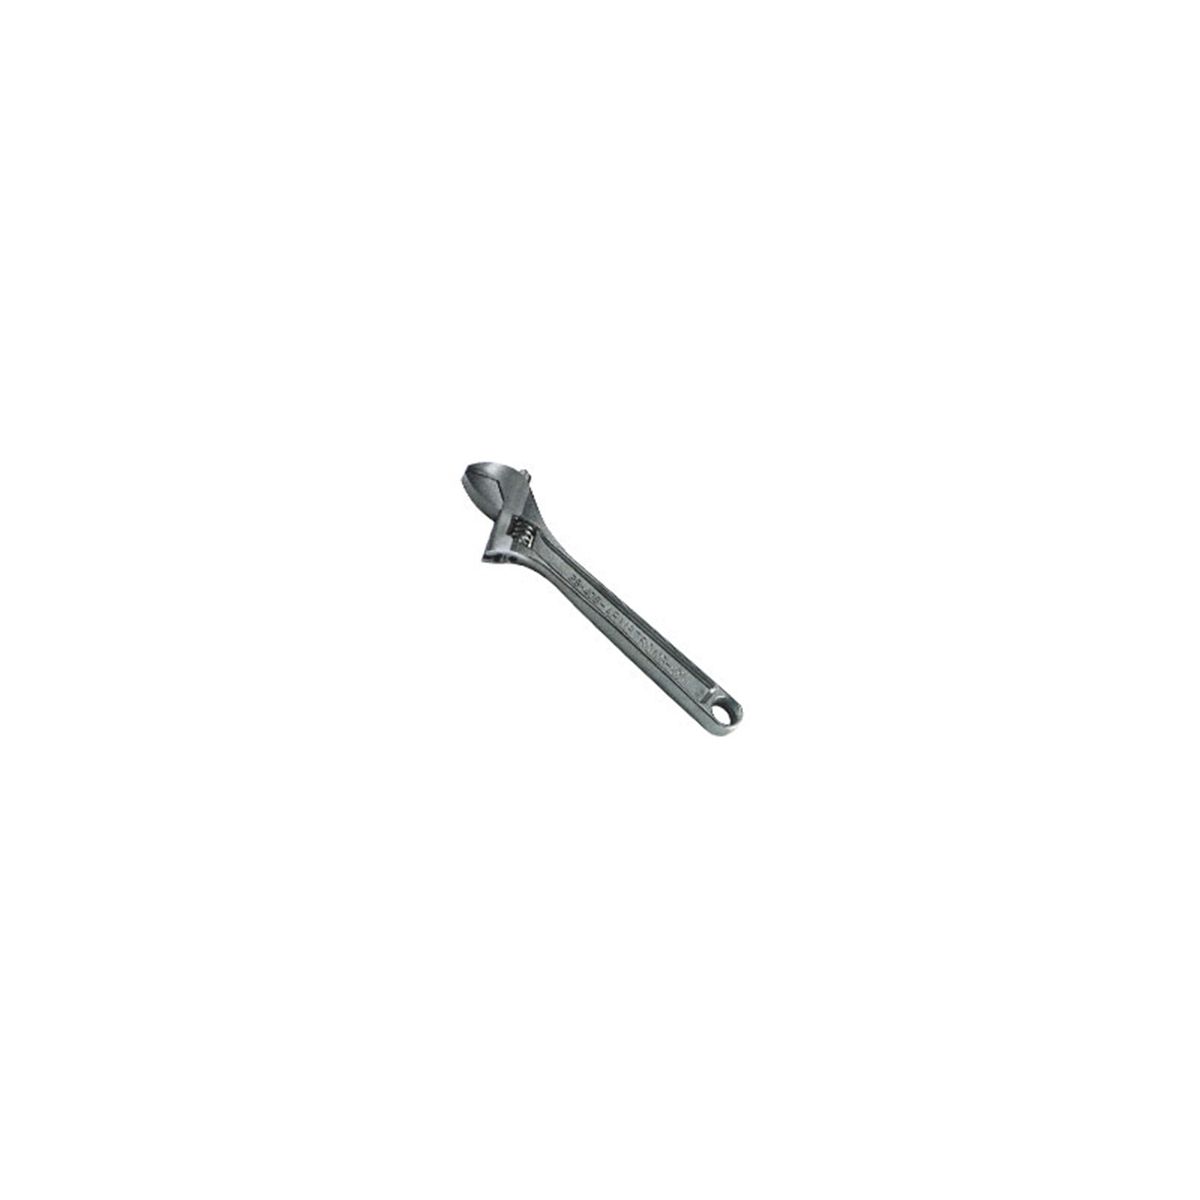 WRENCH ADJUSTABLE 15 IN